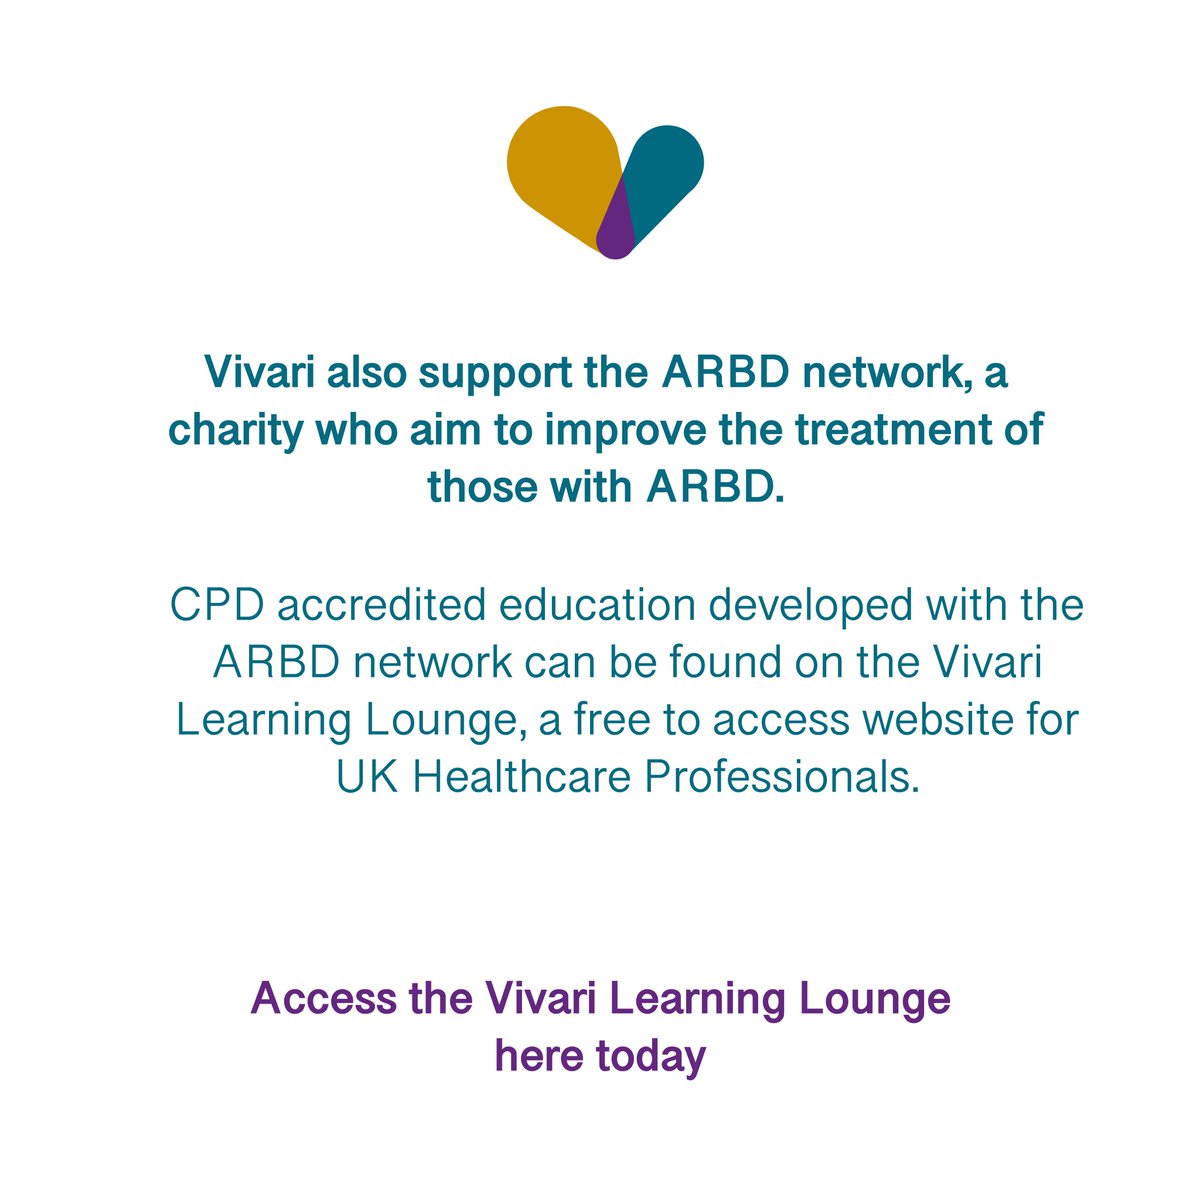 vivarilearninglounge.com/educational-re…

Vivari believe in giving back and support the following charities through donations. 

Access free CPD content here today!

#CPD
#ARBD
#HealthcareProfessionals
#NHS